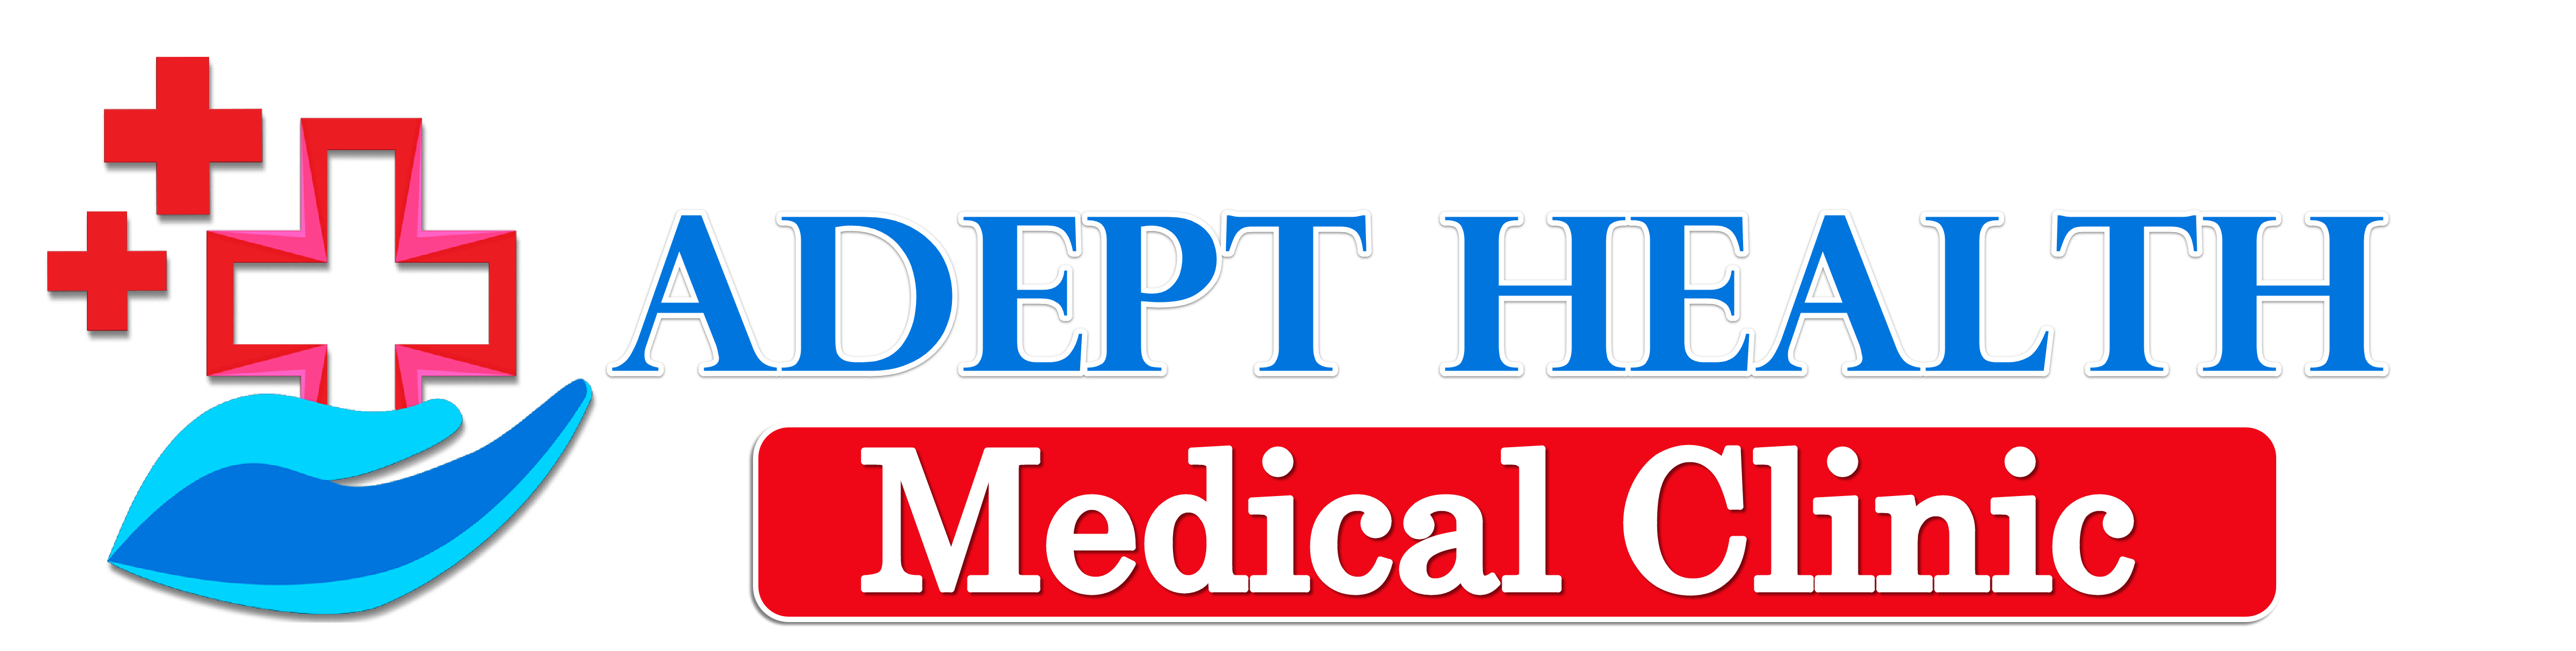 Adept Health Medical Clinic